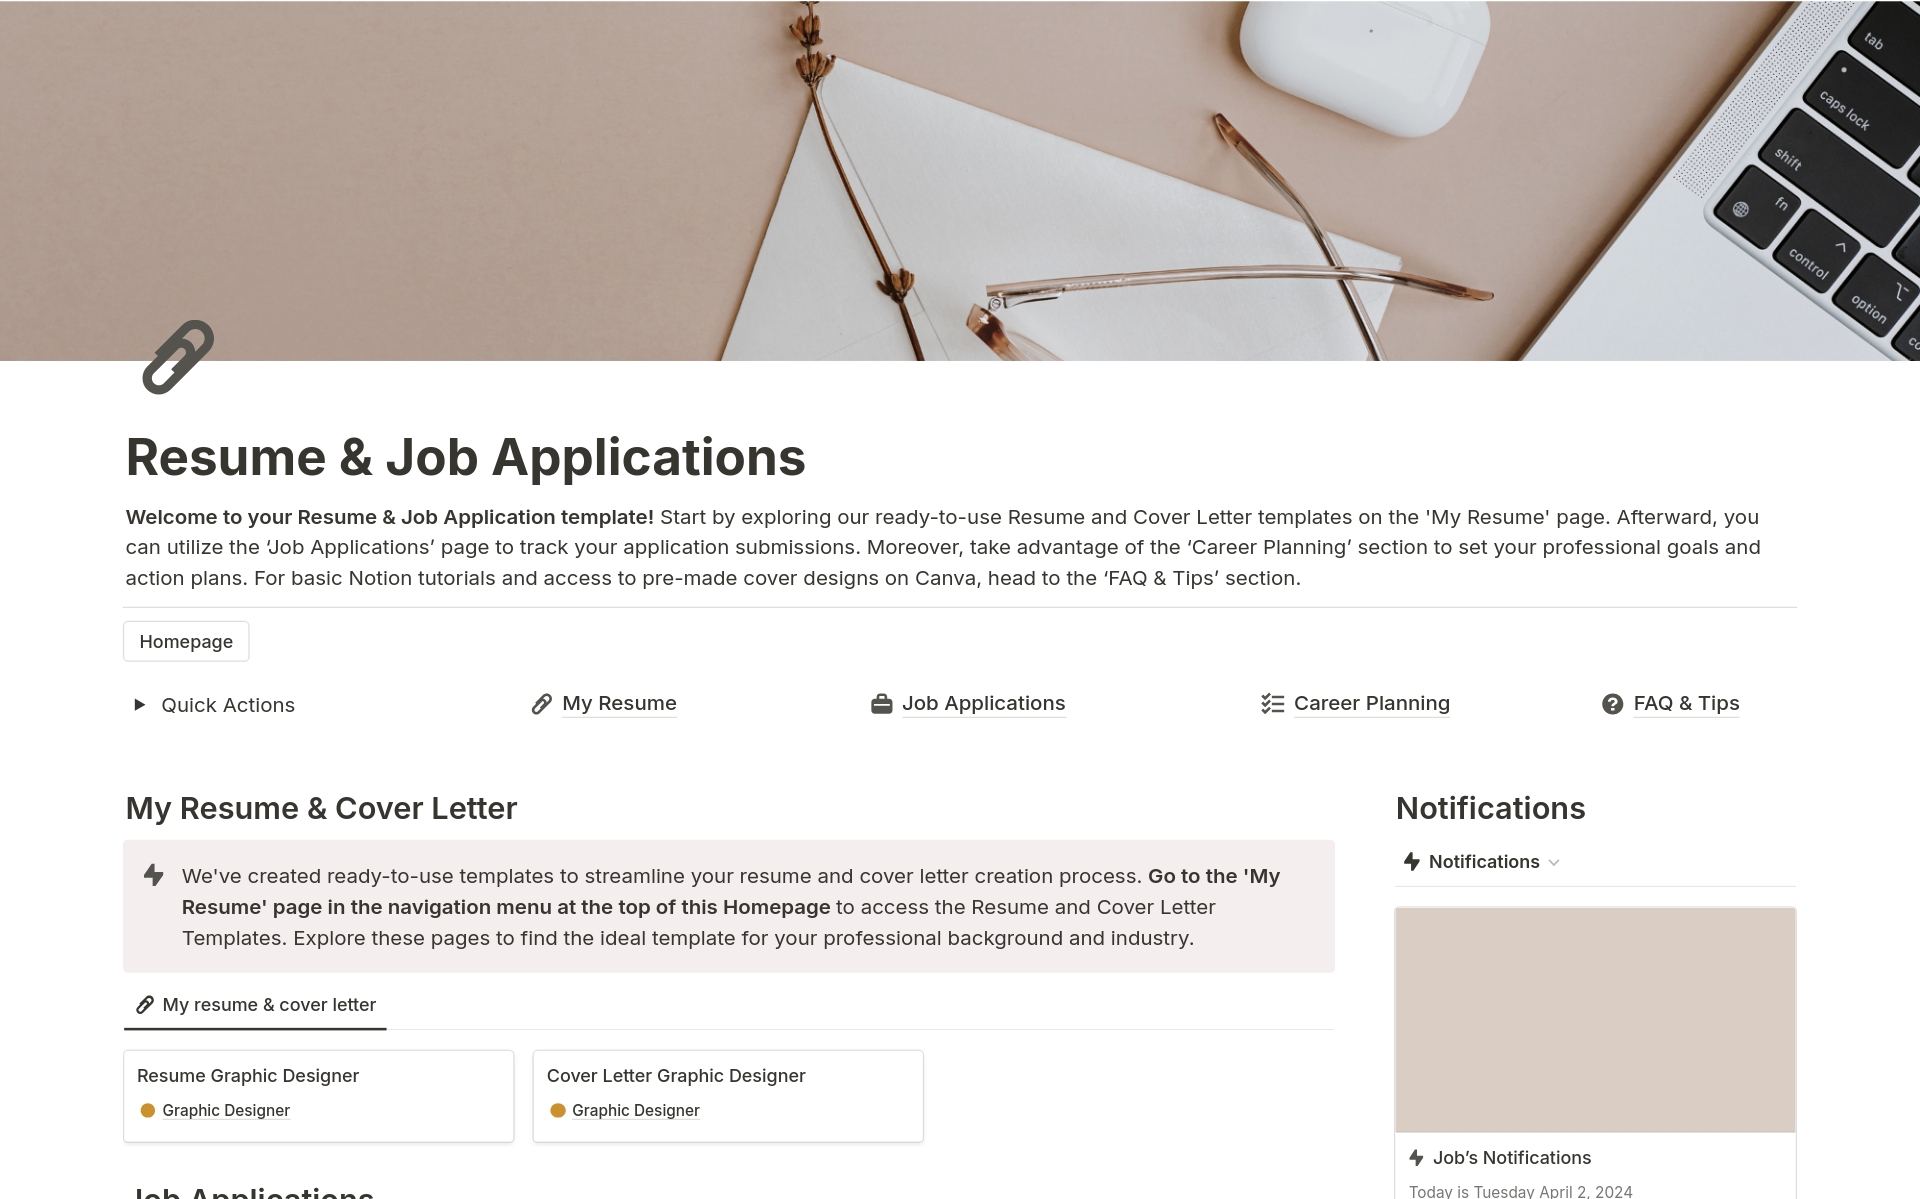 Manage resumes and track job applications